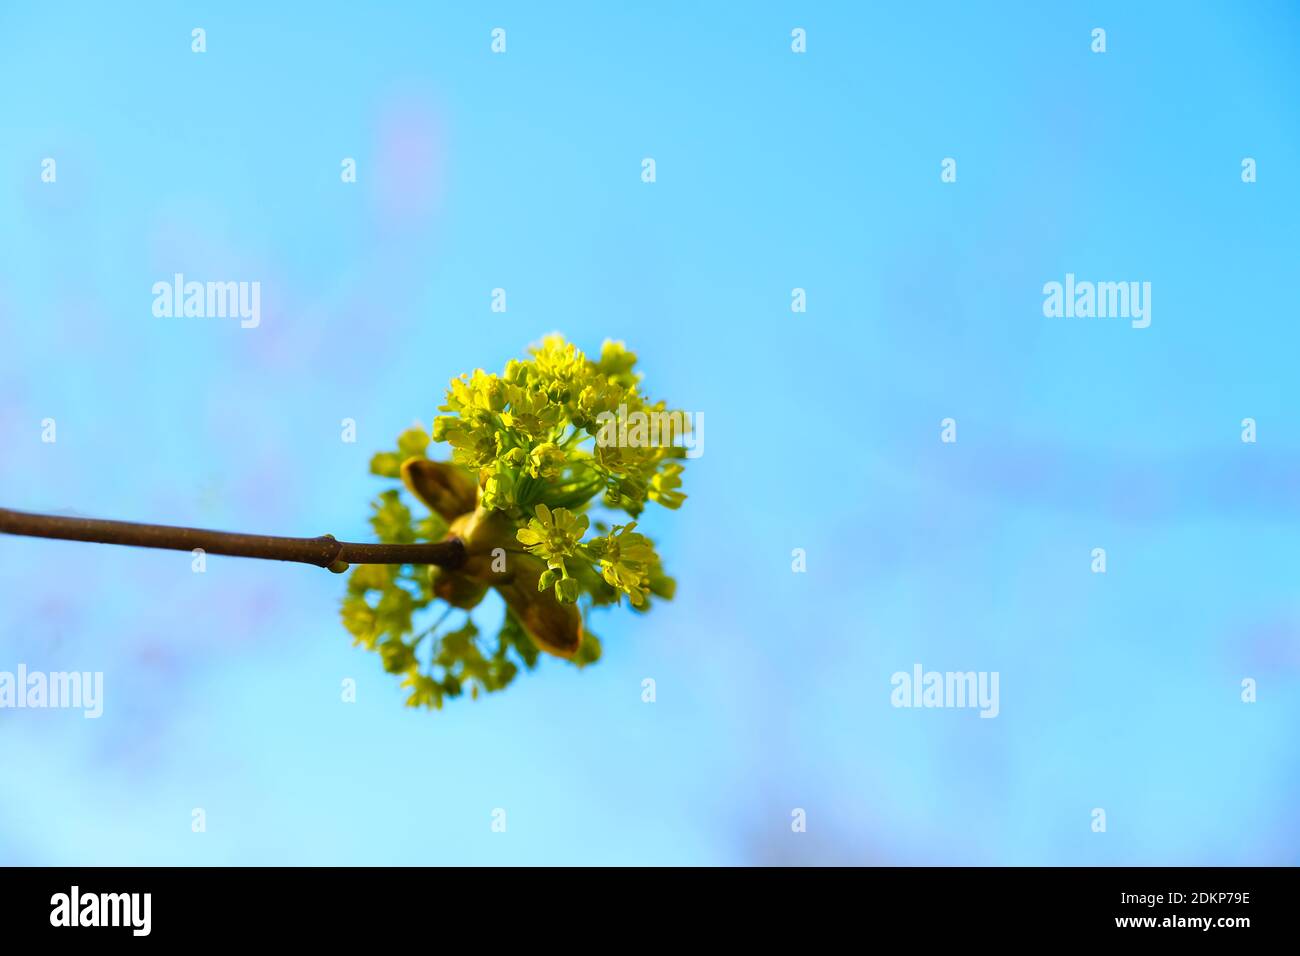 Green buds on branches in spring. Nature and blooming in spring time. Bokeh blue background. Stock Photo